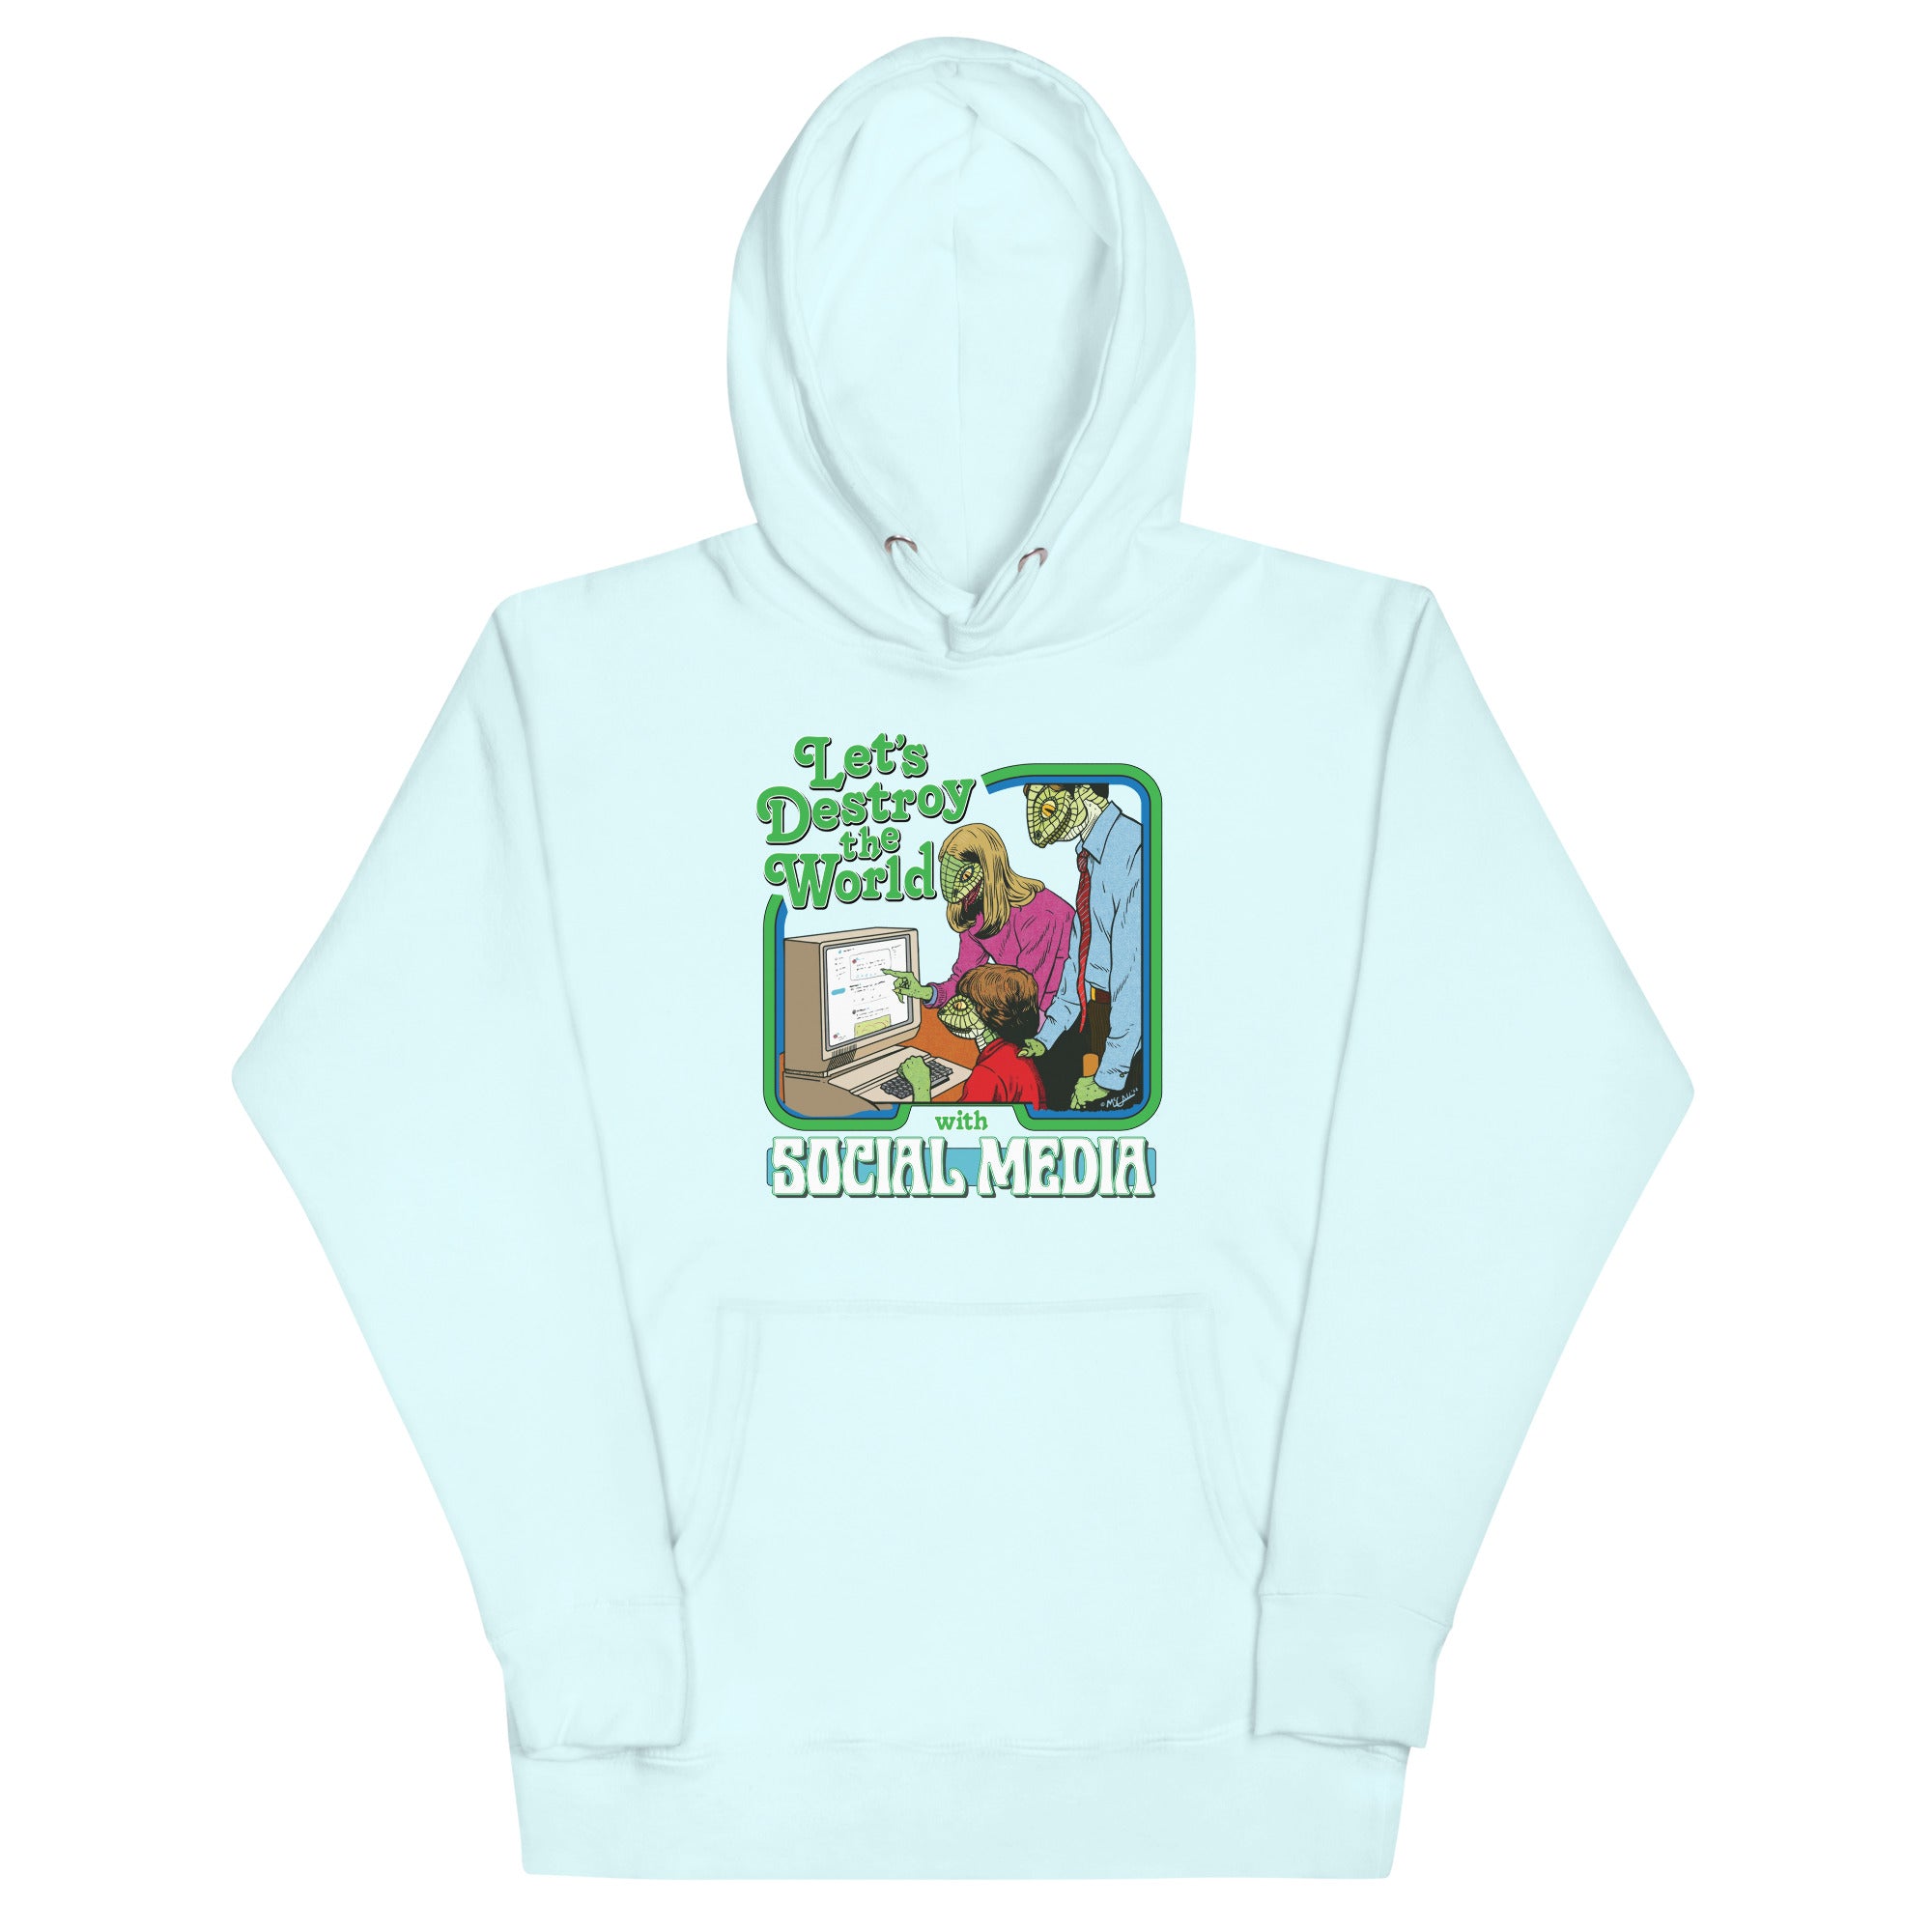 Let’s Destroy the World With Social Media Lizard People Hoodie